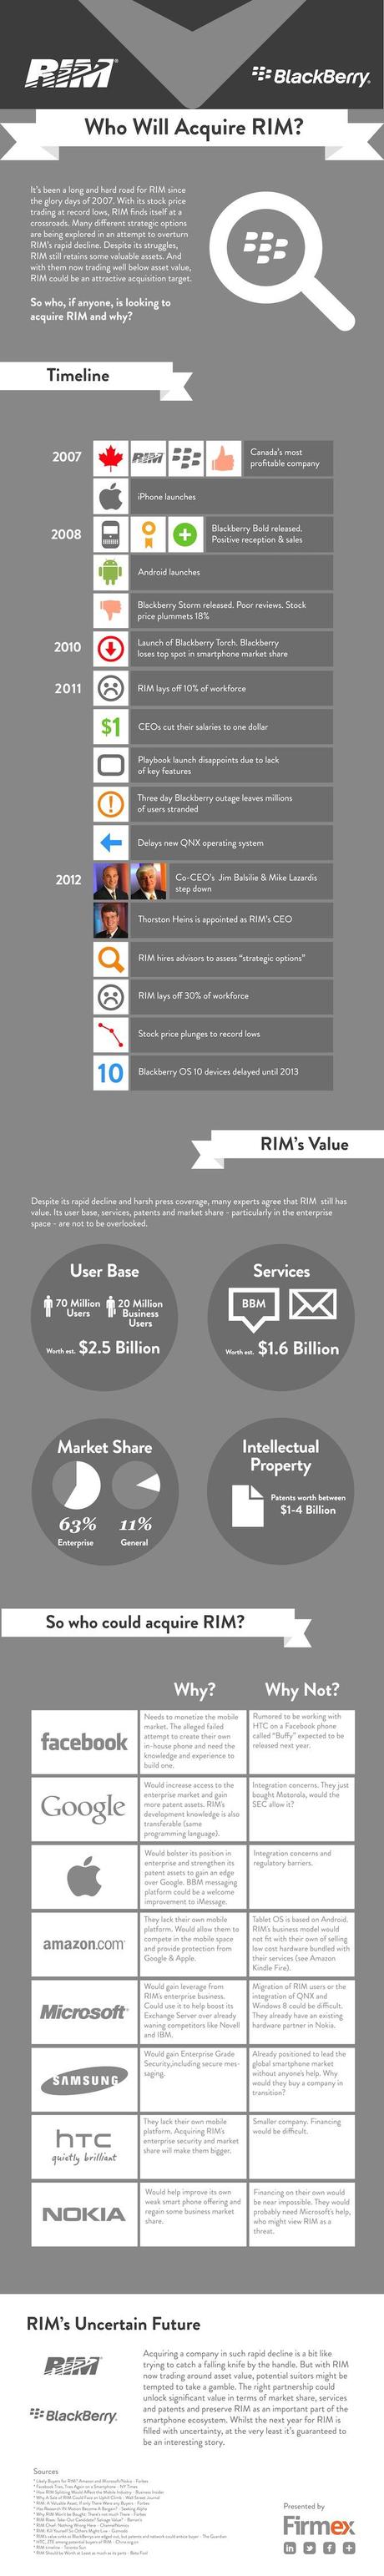 Who Should Acquire RIM Infographic